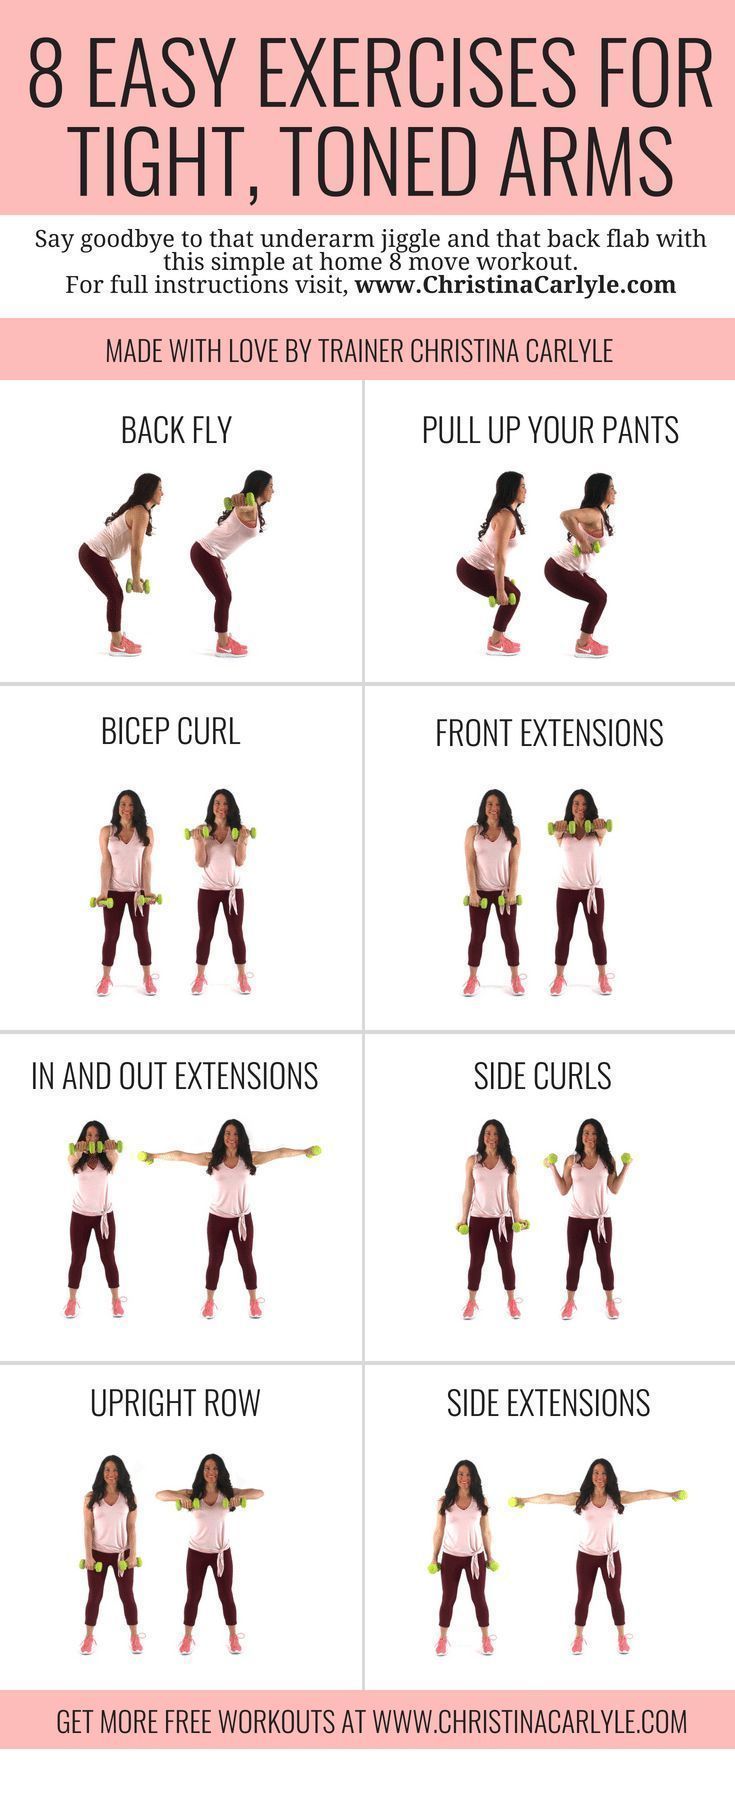 Tone It Up Sports DumbBell 5lbs - Tone It Up Sports DumbBell 5lbs -   16 fitness Ejercicios cintura ideas